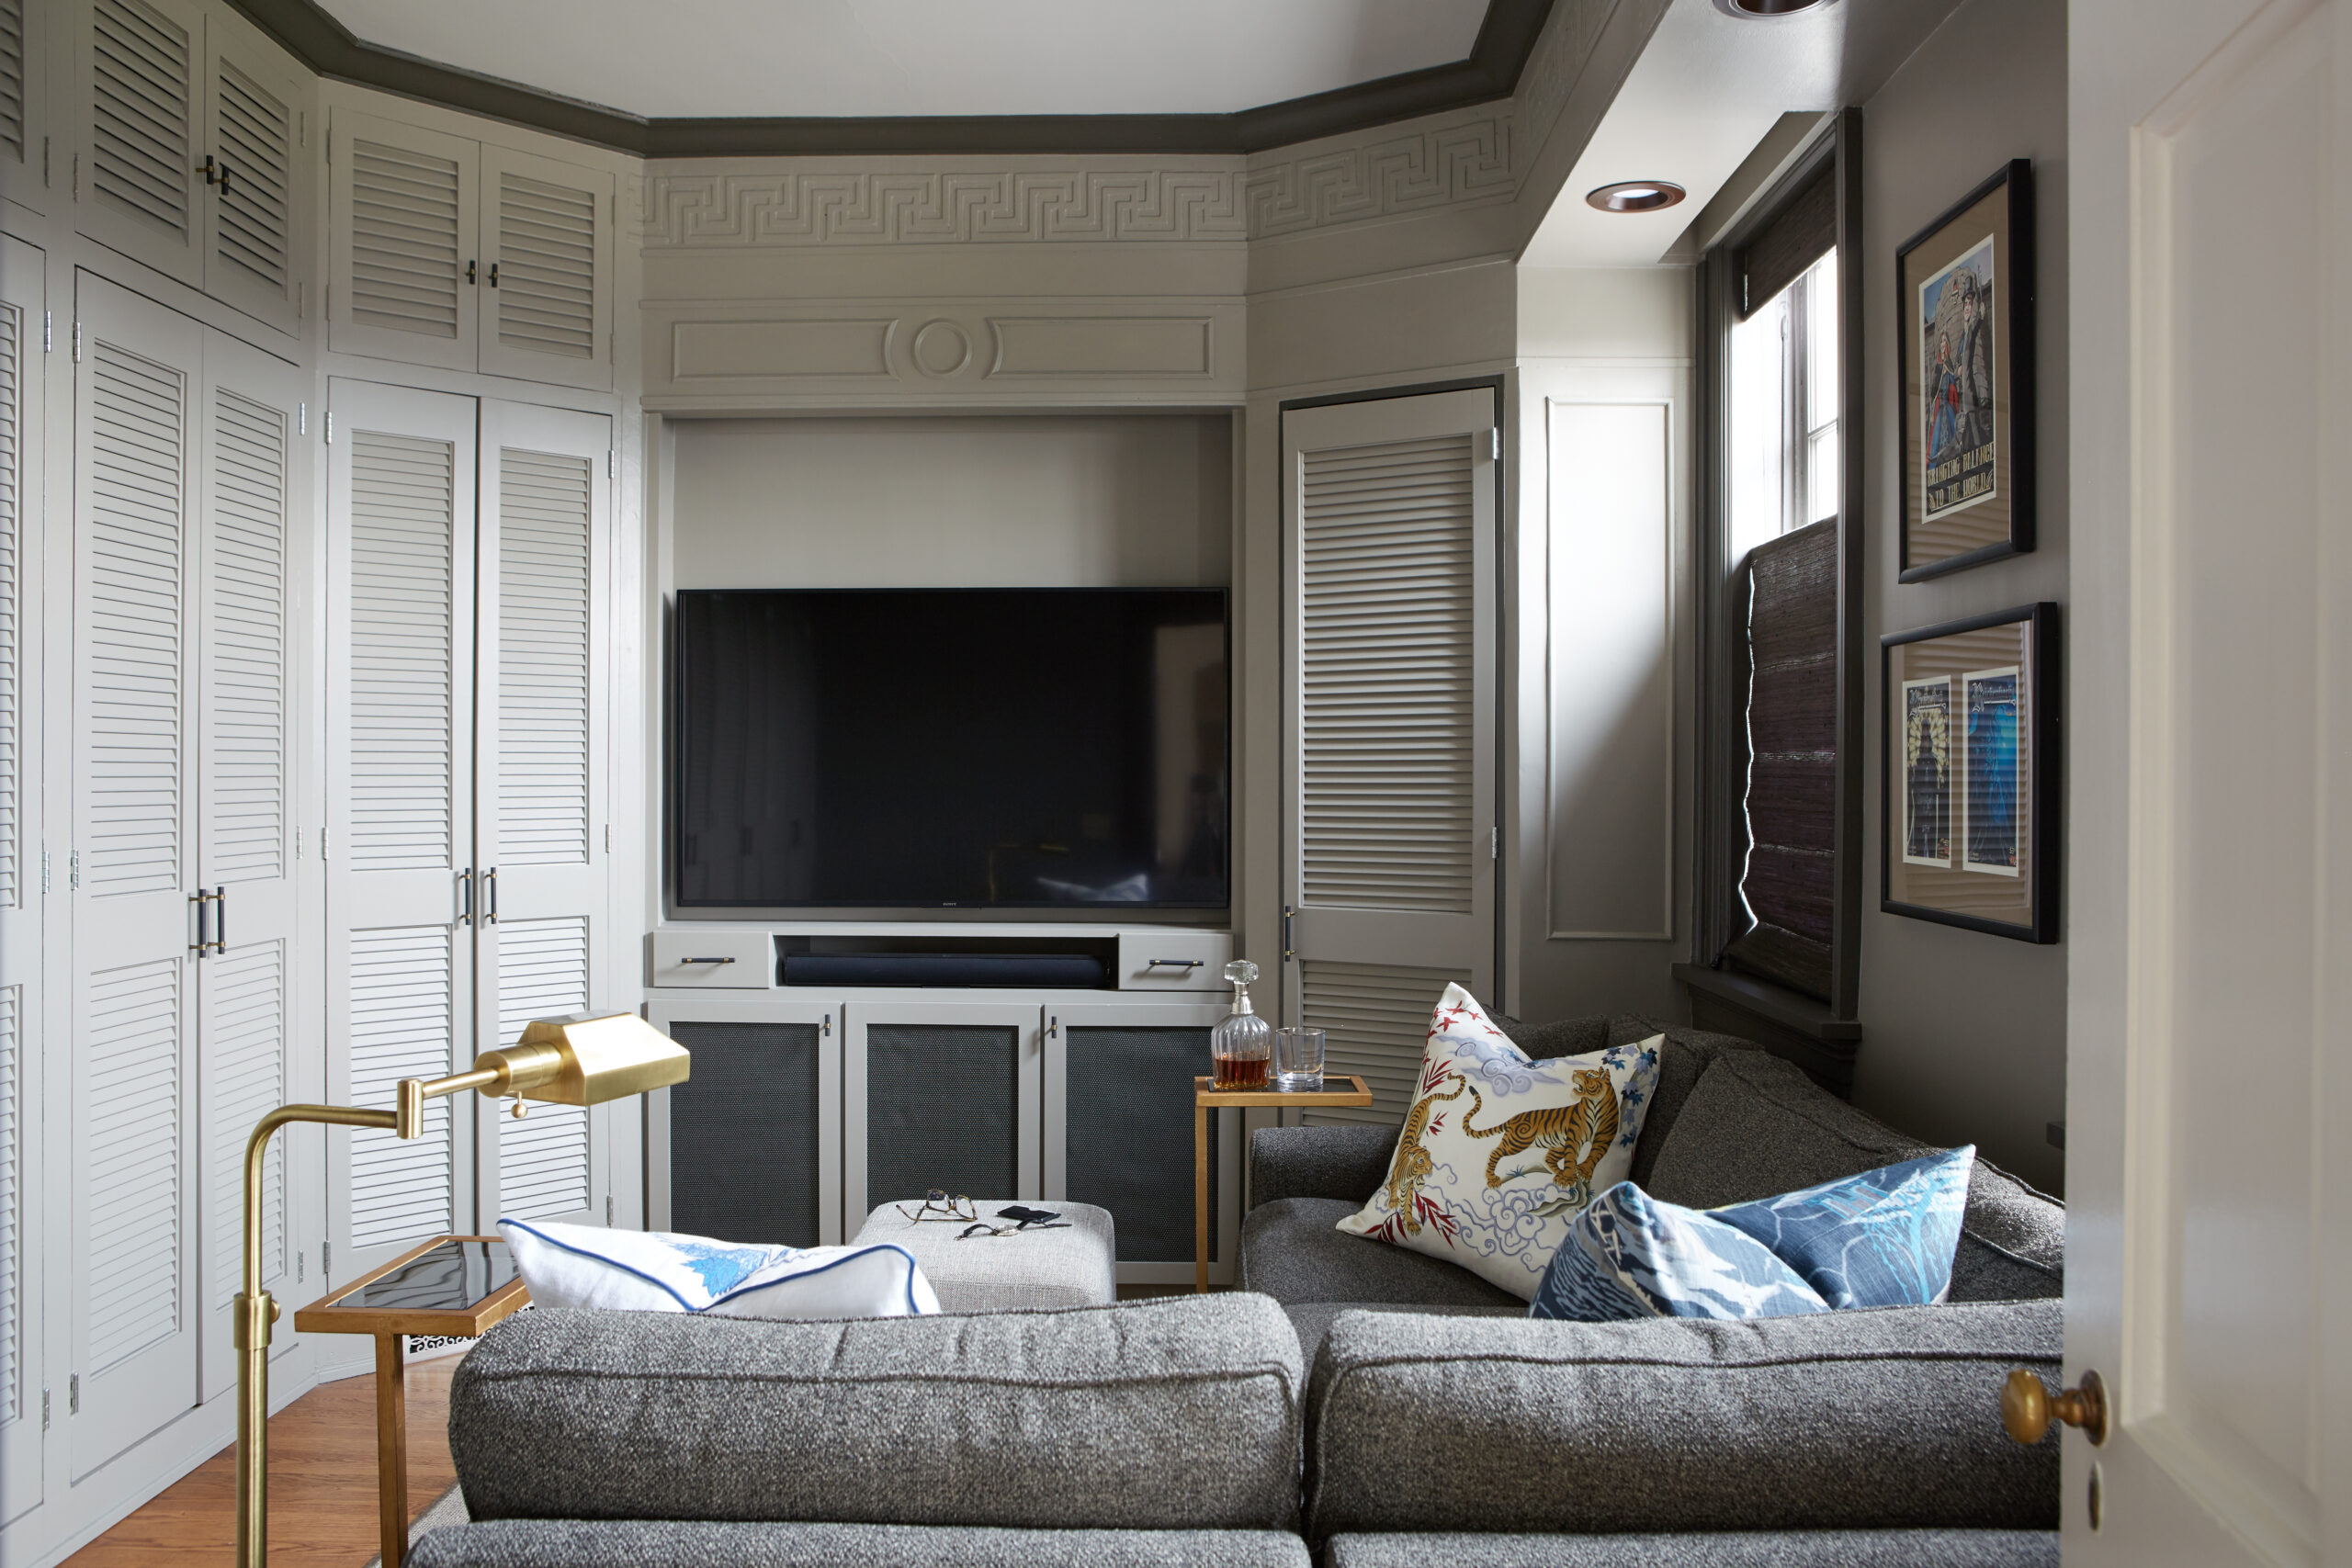 Tv room with dark color palette. relaxing space with fun accents.